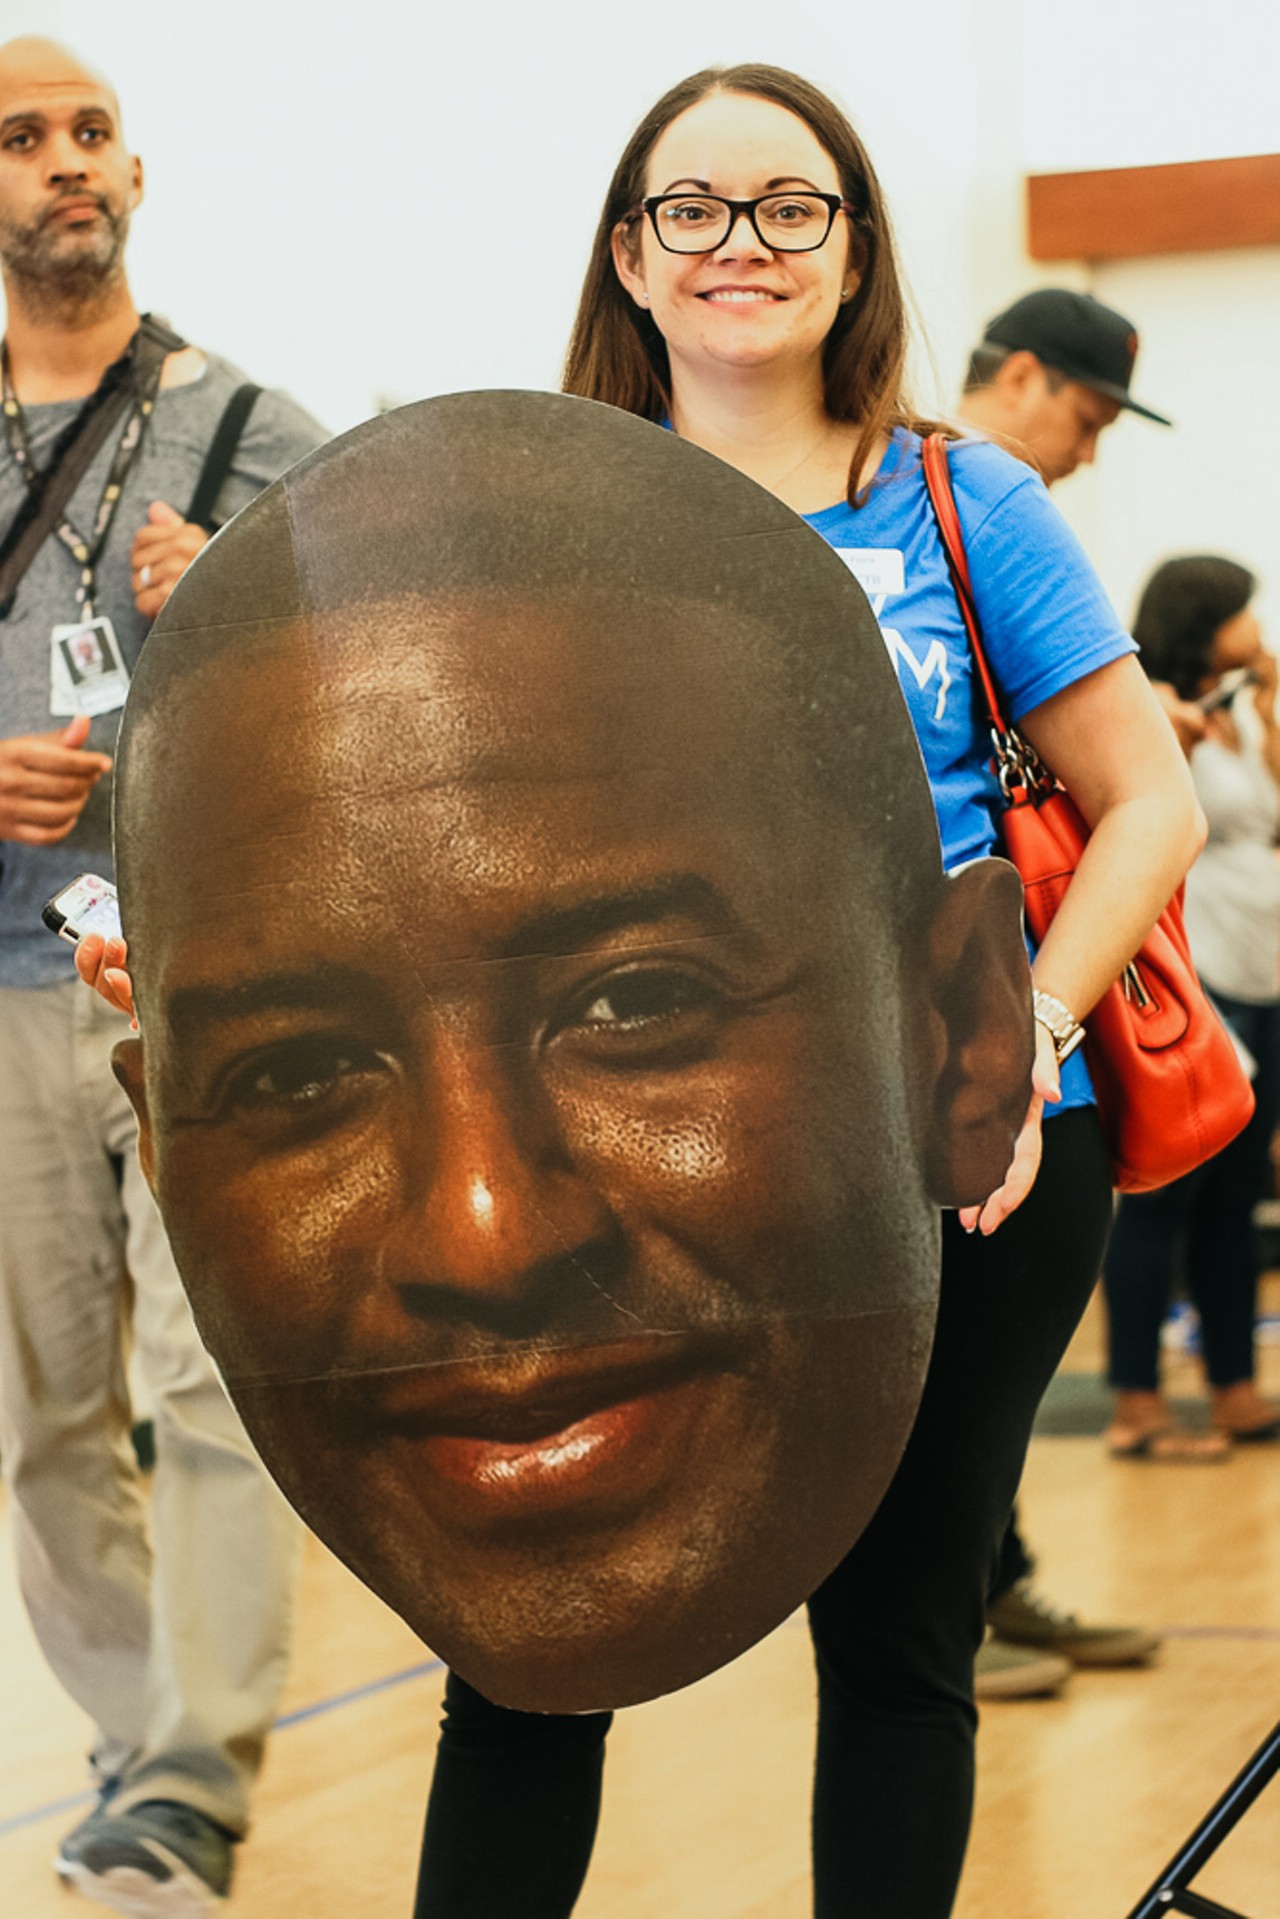 Andrew Gillum supporters at Al Lopez Park in Tampa, Florida on October 27, 2018.